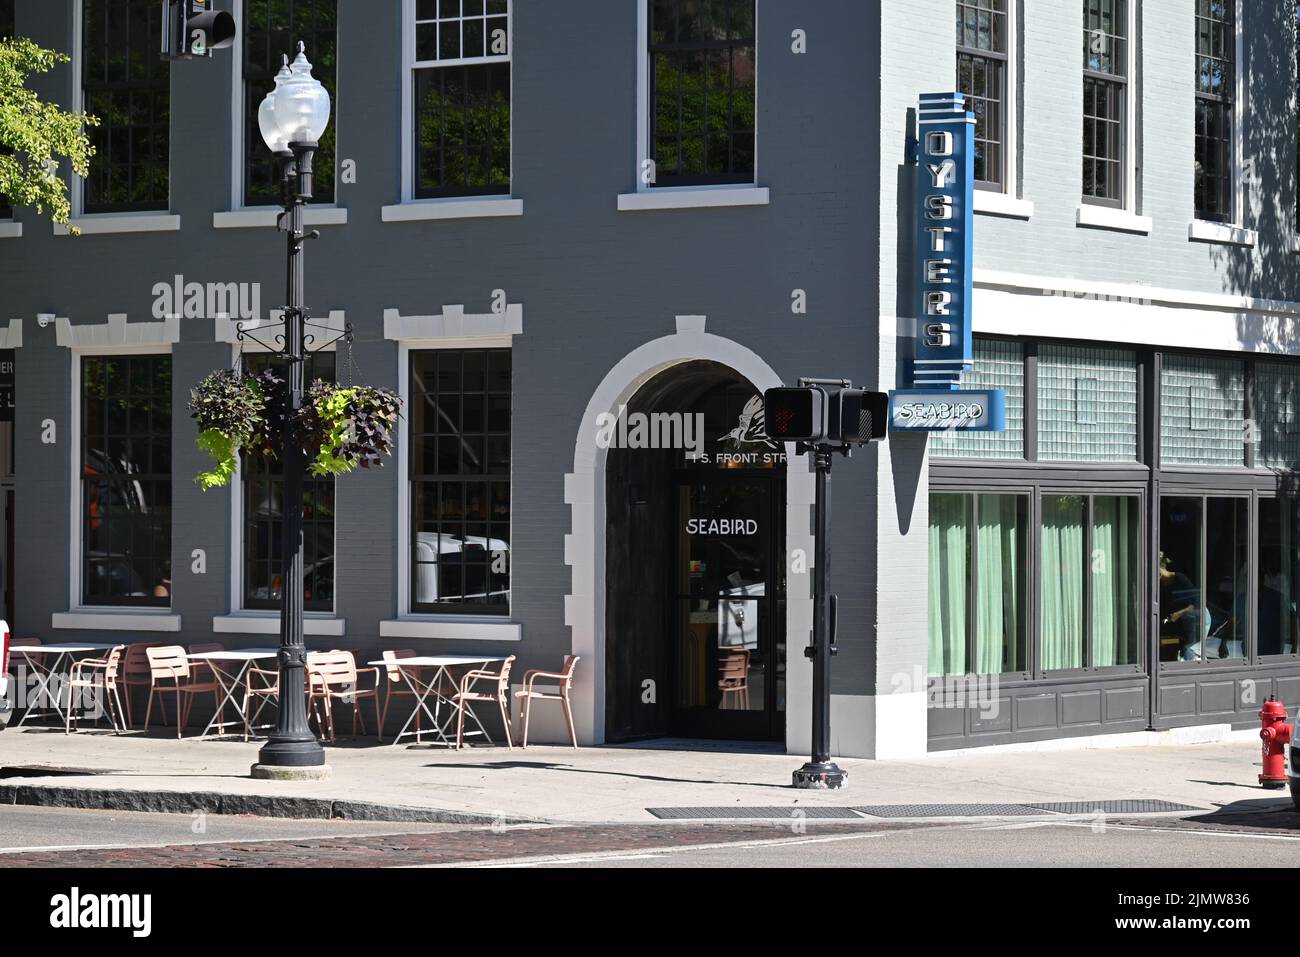 Seabird Oyster bar at the corner of Market and Front Streets in downtown Wilmington, North Carolina. Stock Photo